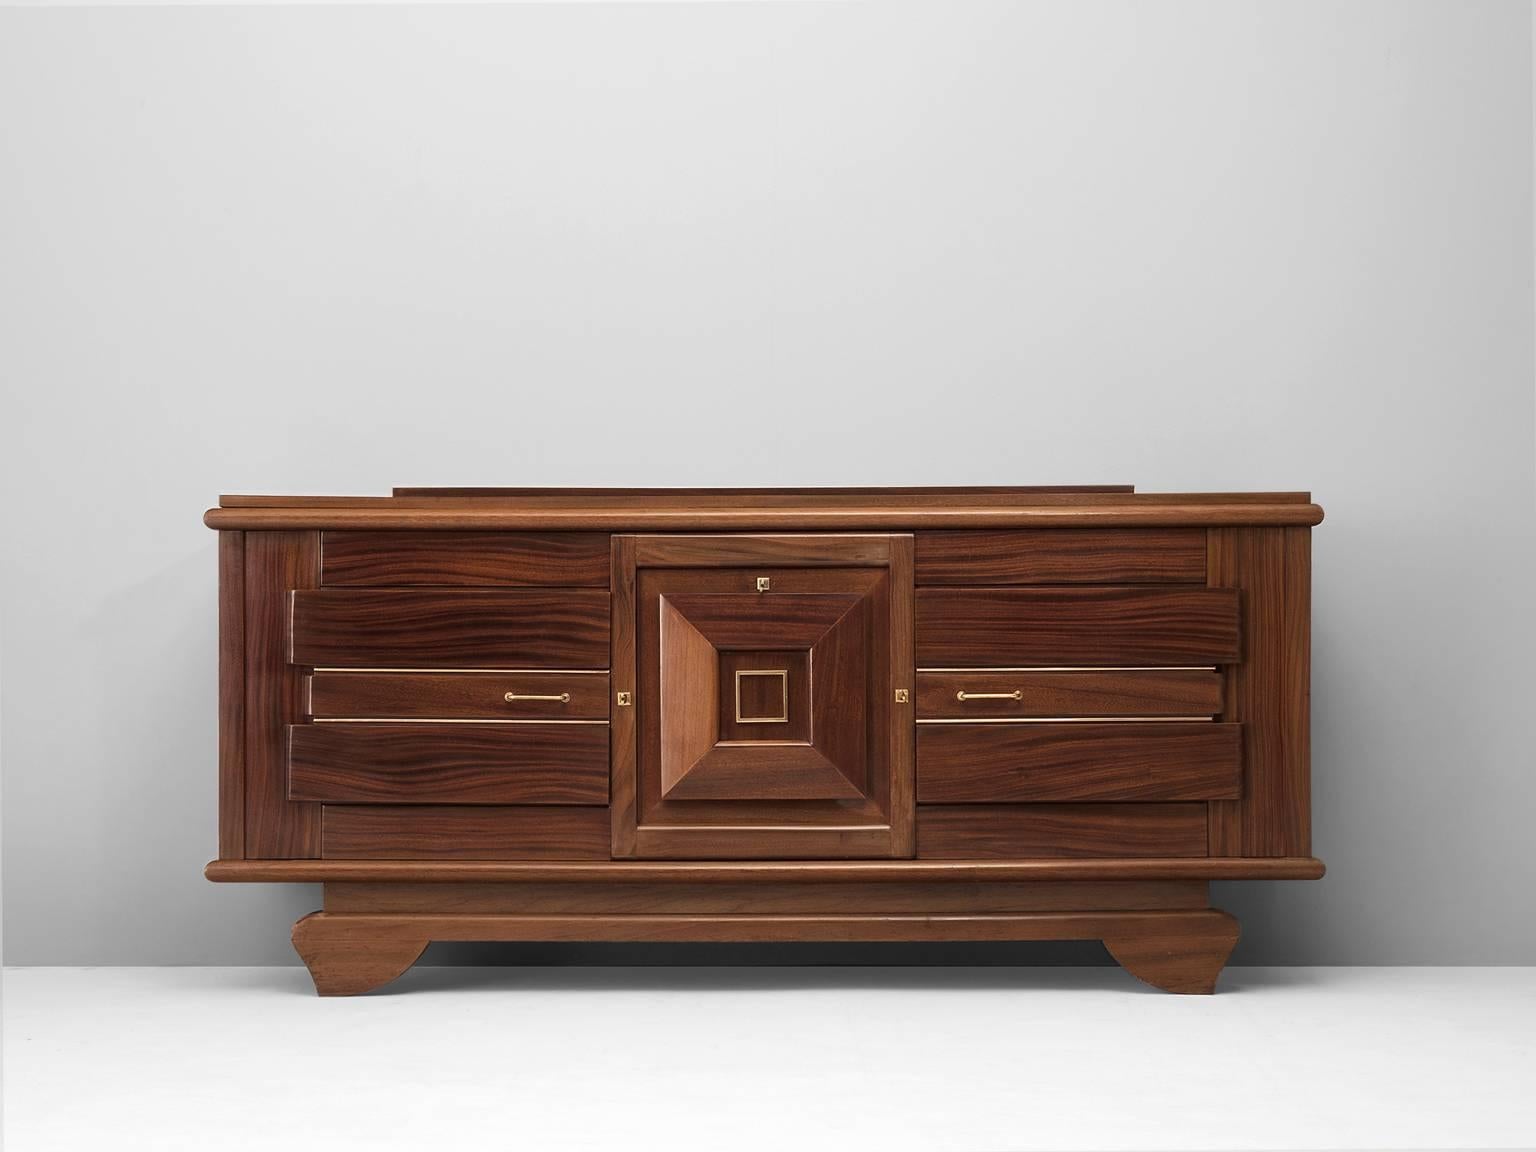 Credenza, in mahogany, France 1940s. 

Rare art Deco sideboards in solid mahogany and brass details. Well designed and crafted with beautiful details. Parquet top from mahogany veneer. Three doors, inside of shelves with decorated